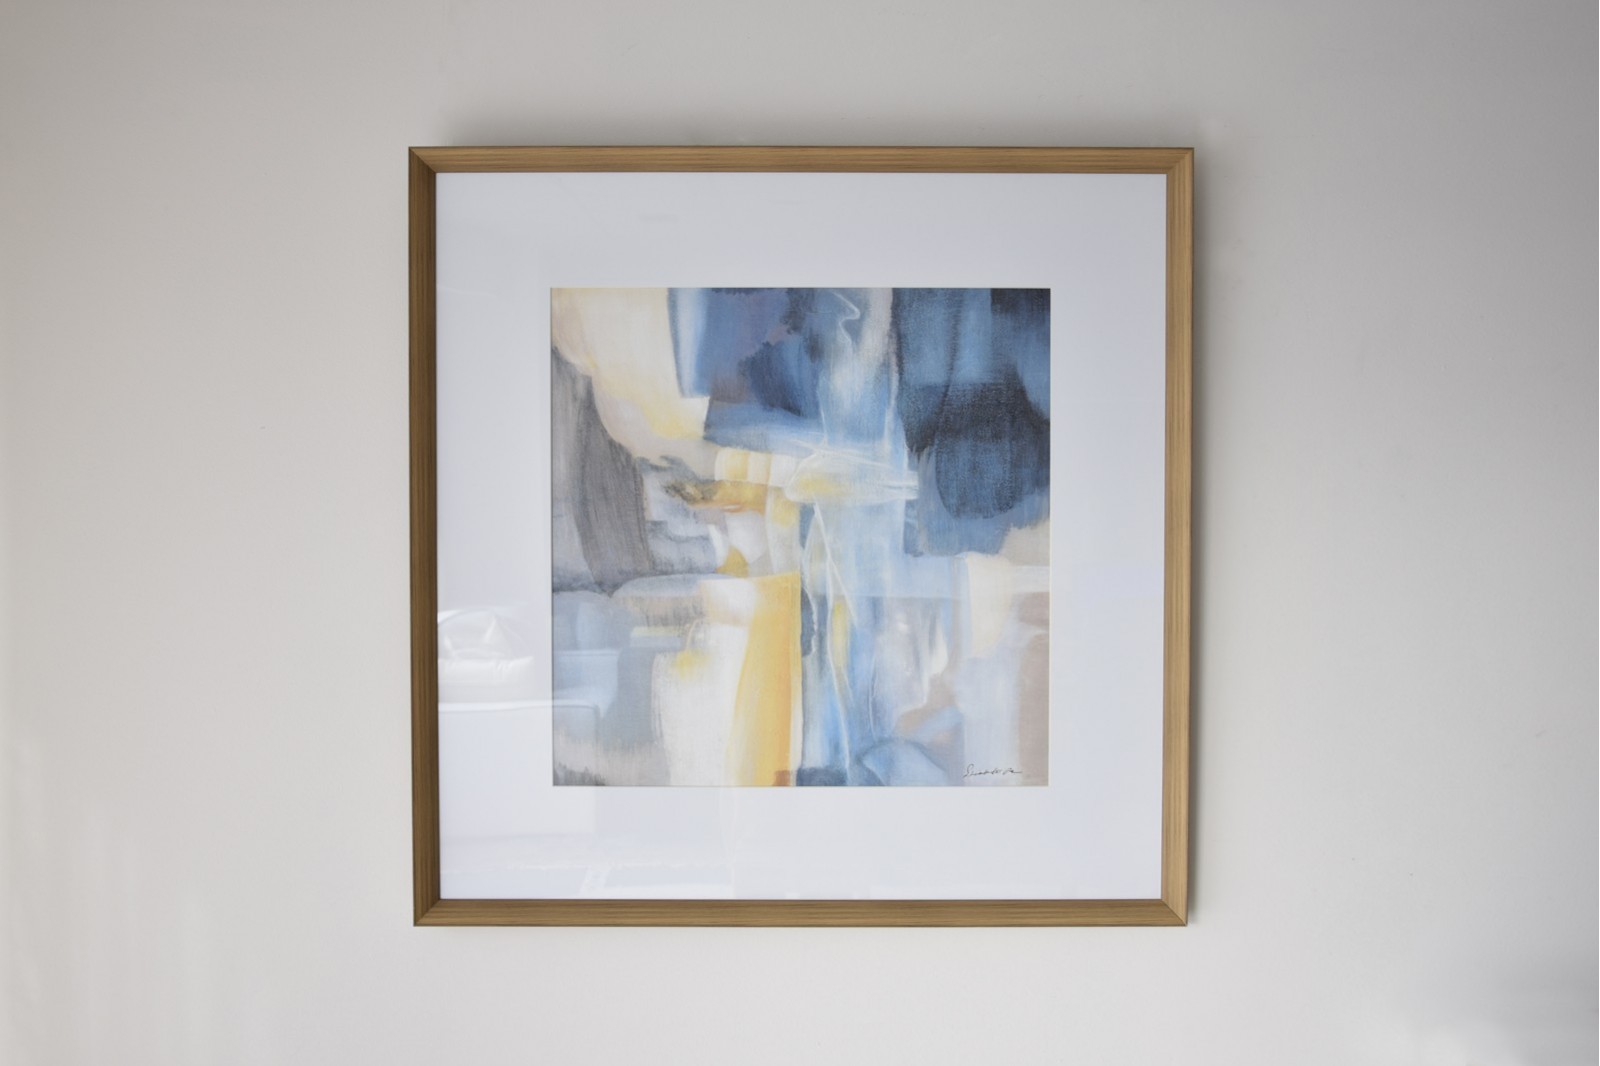 ABSTRACT PAINTING IN BLUE N2. GLASS AND FRAME